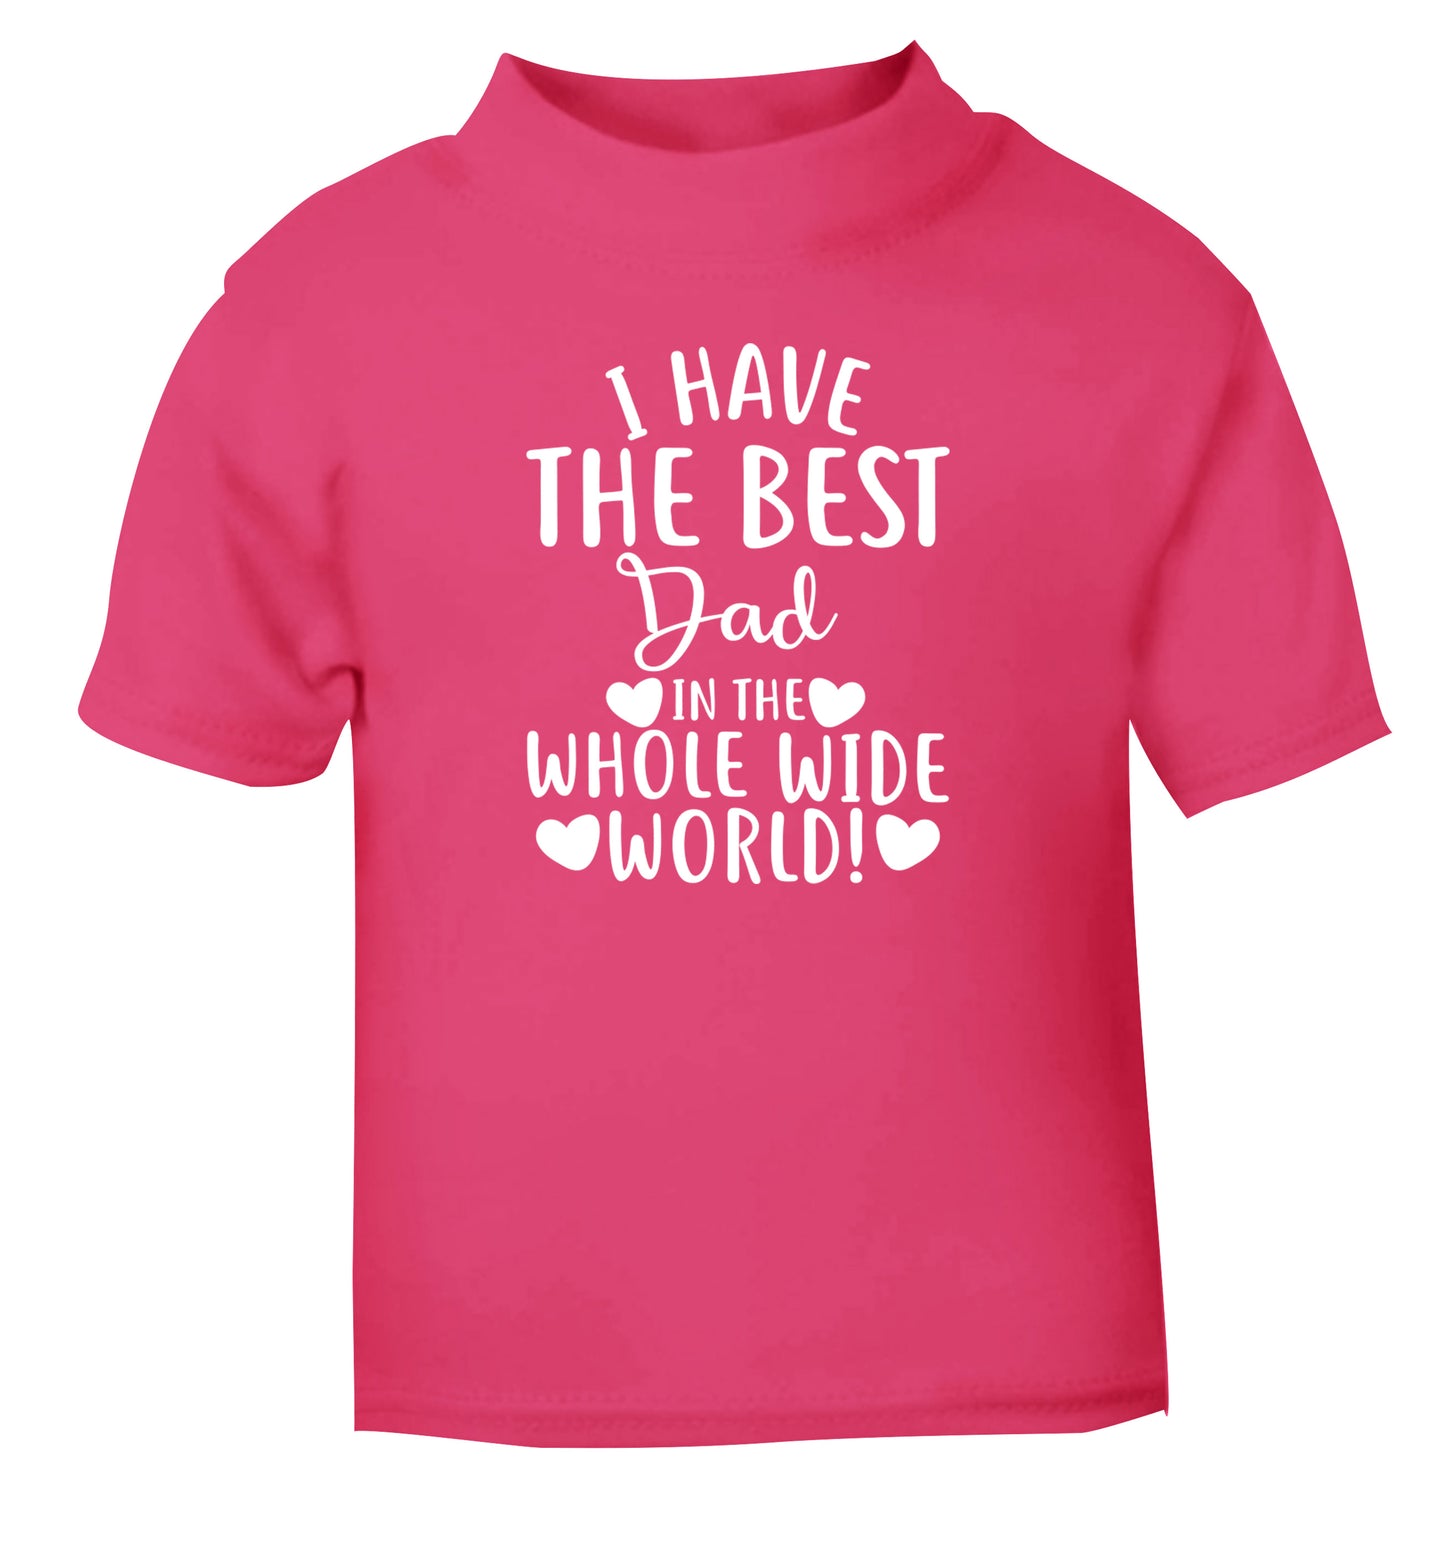 I have the best dad in the whole wide world! pink Baby Toddler Tshirt 2 Years